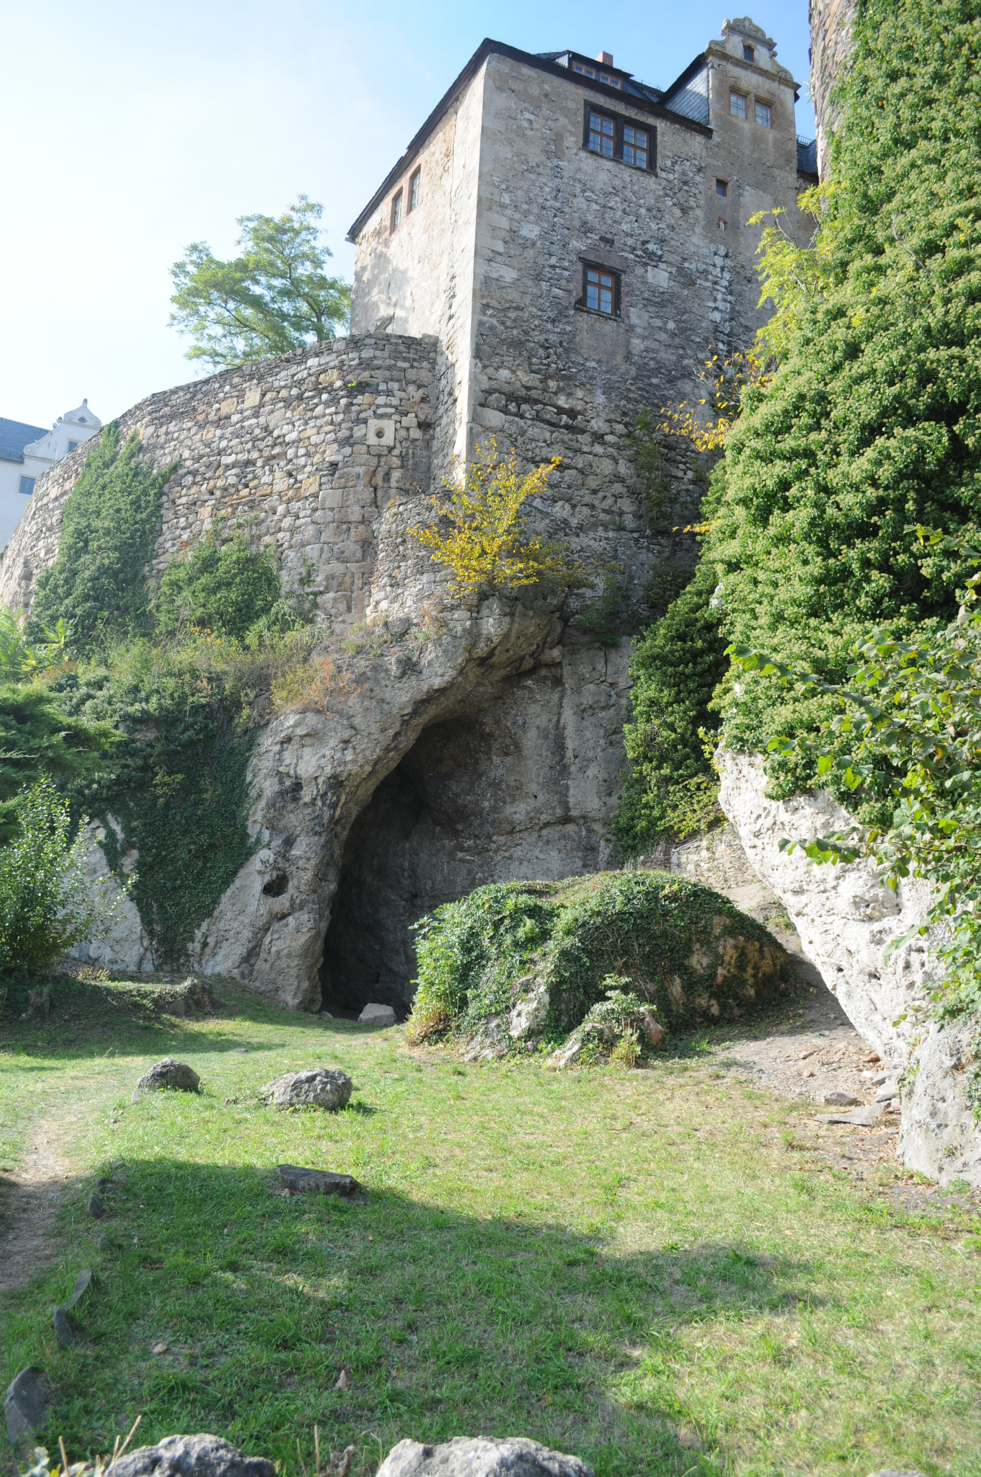 The cave site beneath the castle of Ranis in Thuringia, Germany